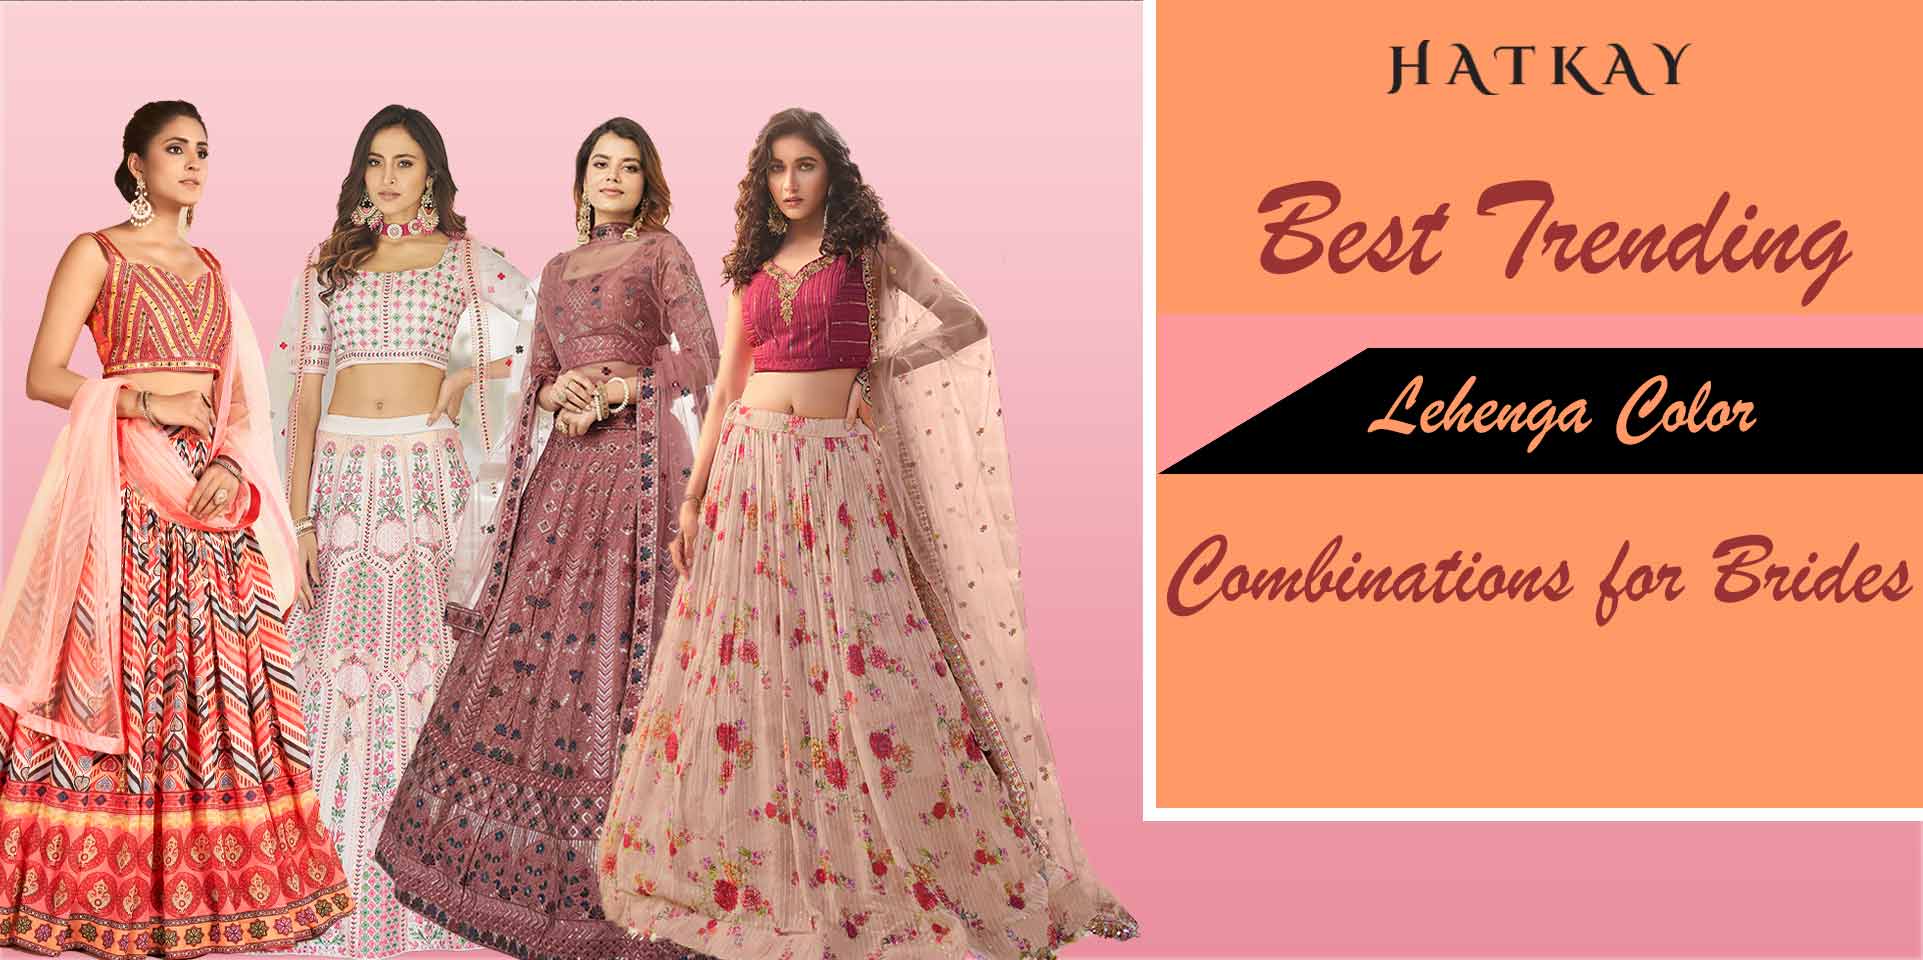 What are the Trending Lehenga Color Combinations for Brides, and Which is the Best Color?